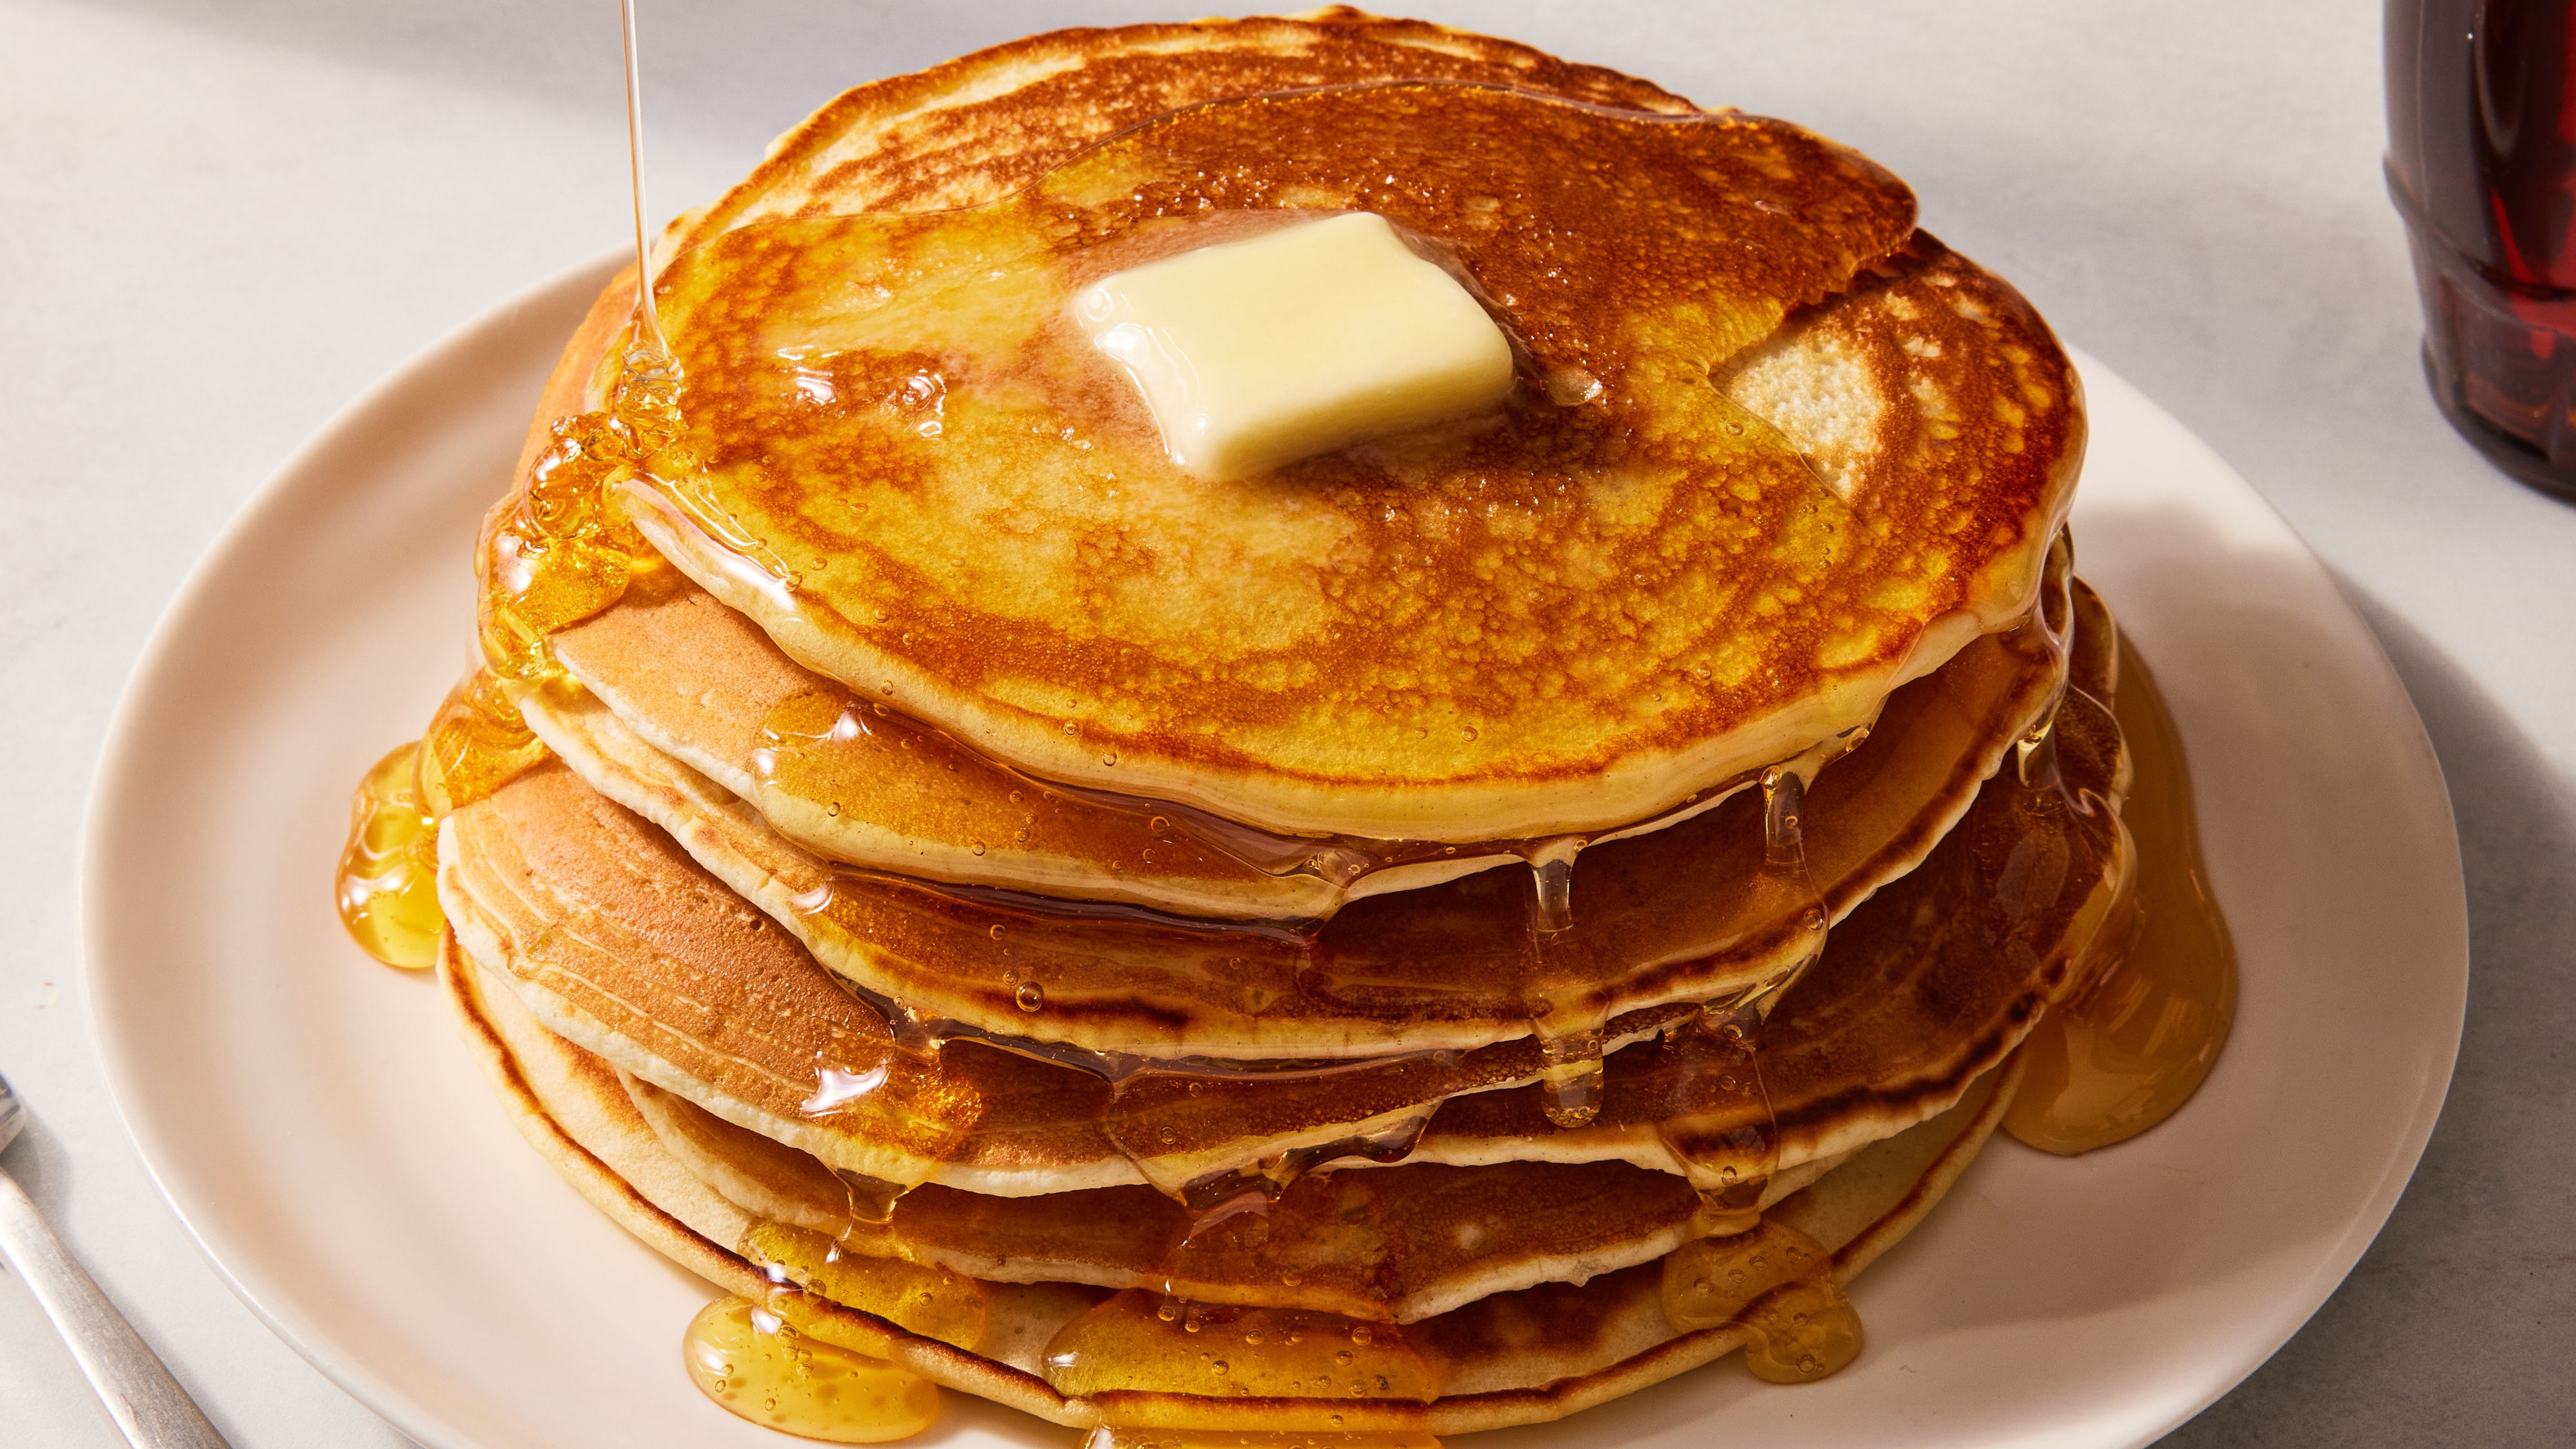 https://hips.hearstapps.com/hmg-prod/images/best-homemade-pancakes-index-640775a2dbad8.jpg?crop=0.8890503582601677xw:1xh;center,top